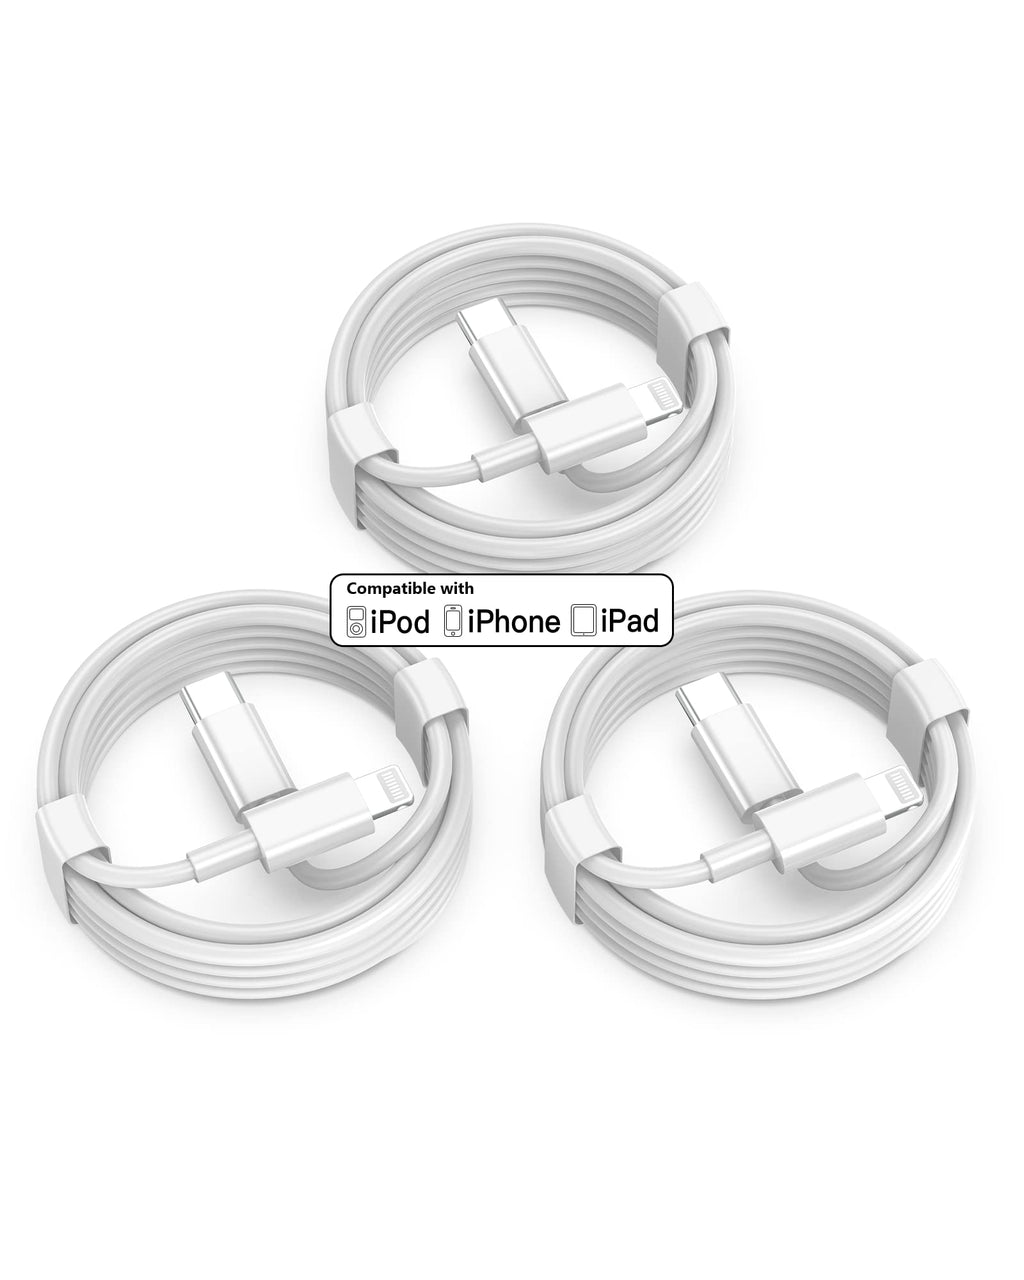  [AUSTRALIA] - 3 Pack [Apple MFi Certified] USB C to Lightning Cable 6ft, iPhone Fast Charger Cable, Apple Charging Cord Compatible with iPhone 13/13 Pro/13 Pro Max/12/12 Pro/12 Pro Max/11 Pro/11 Pro Max/XR/X/8,iPad